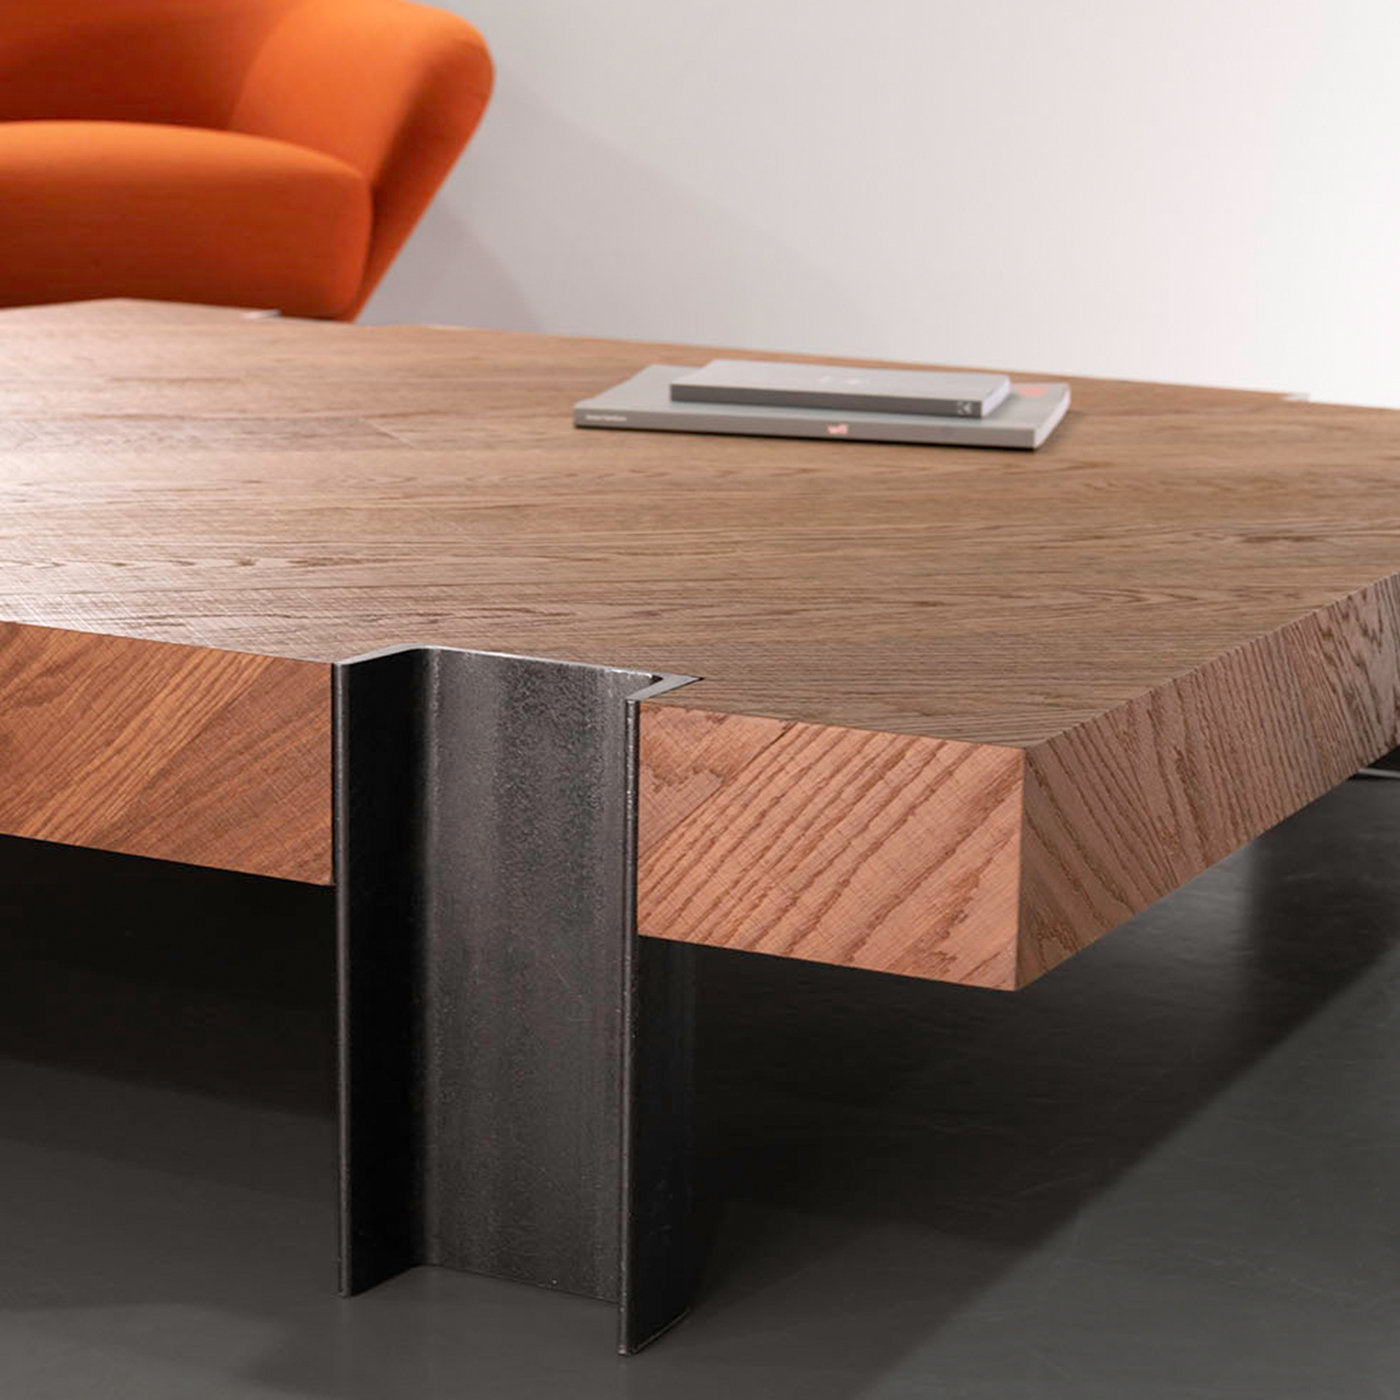 T50 Coffee Table by Jean-Michel Wilmotte - Alternative view 4